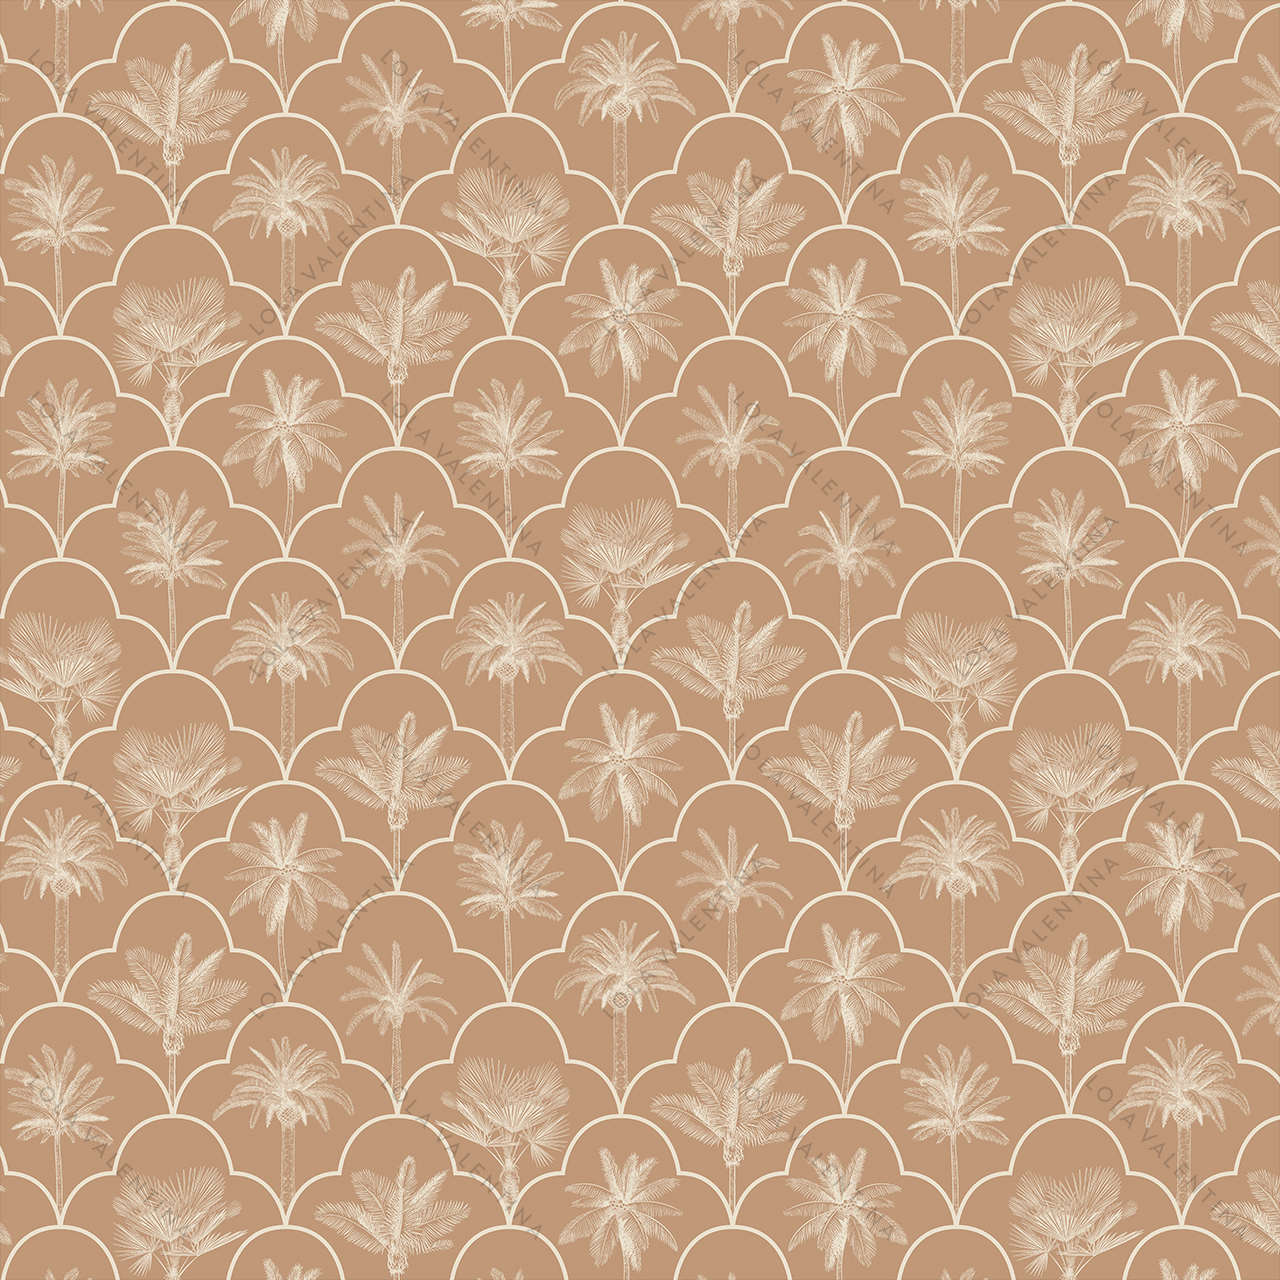 Caramel-Biscayne-Pattern-30x30-From-Deco-Collection-Lola-Valentina-High-End-Linen-Rental